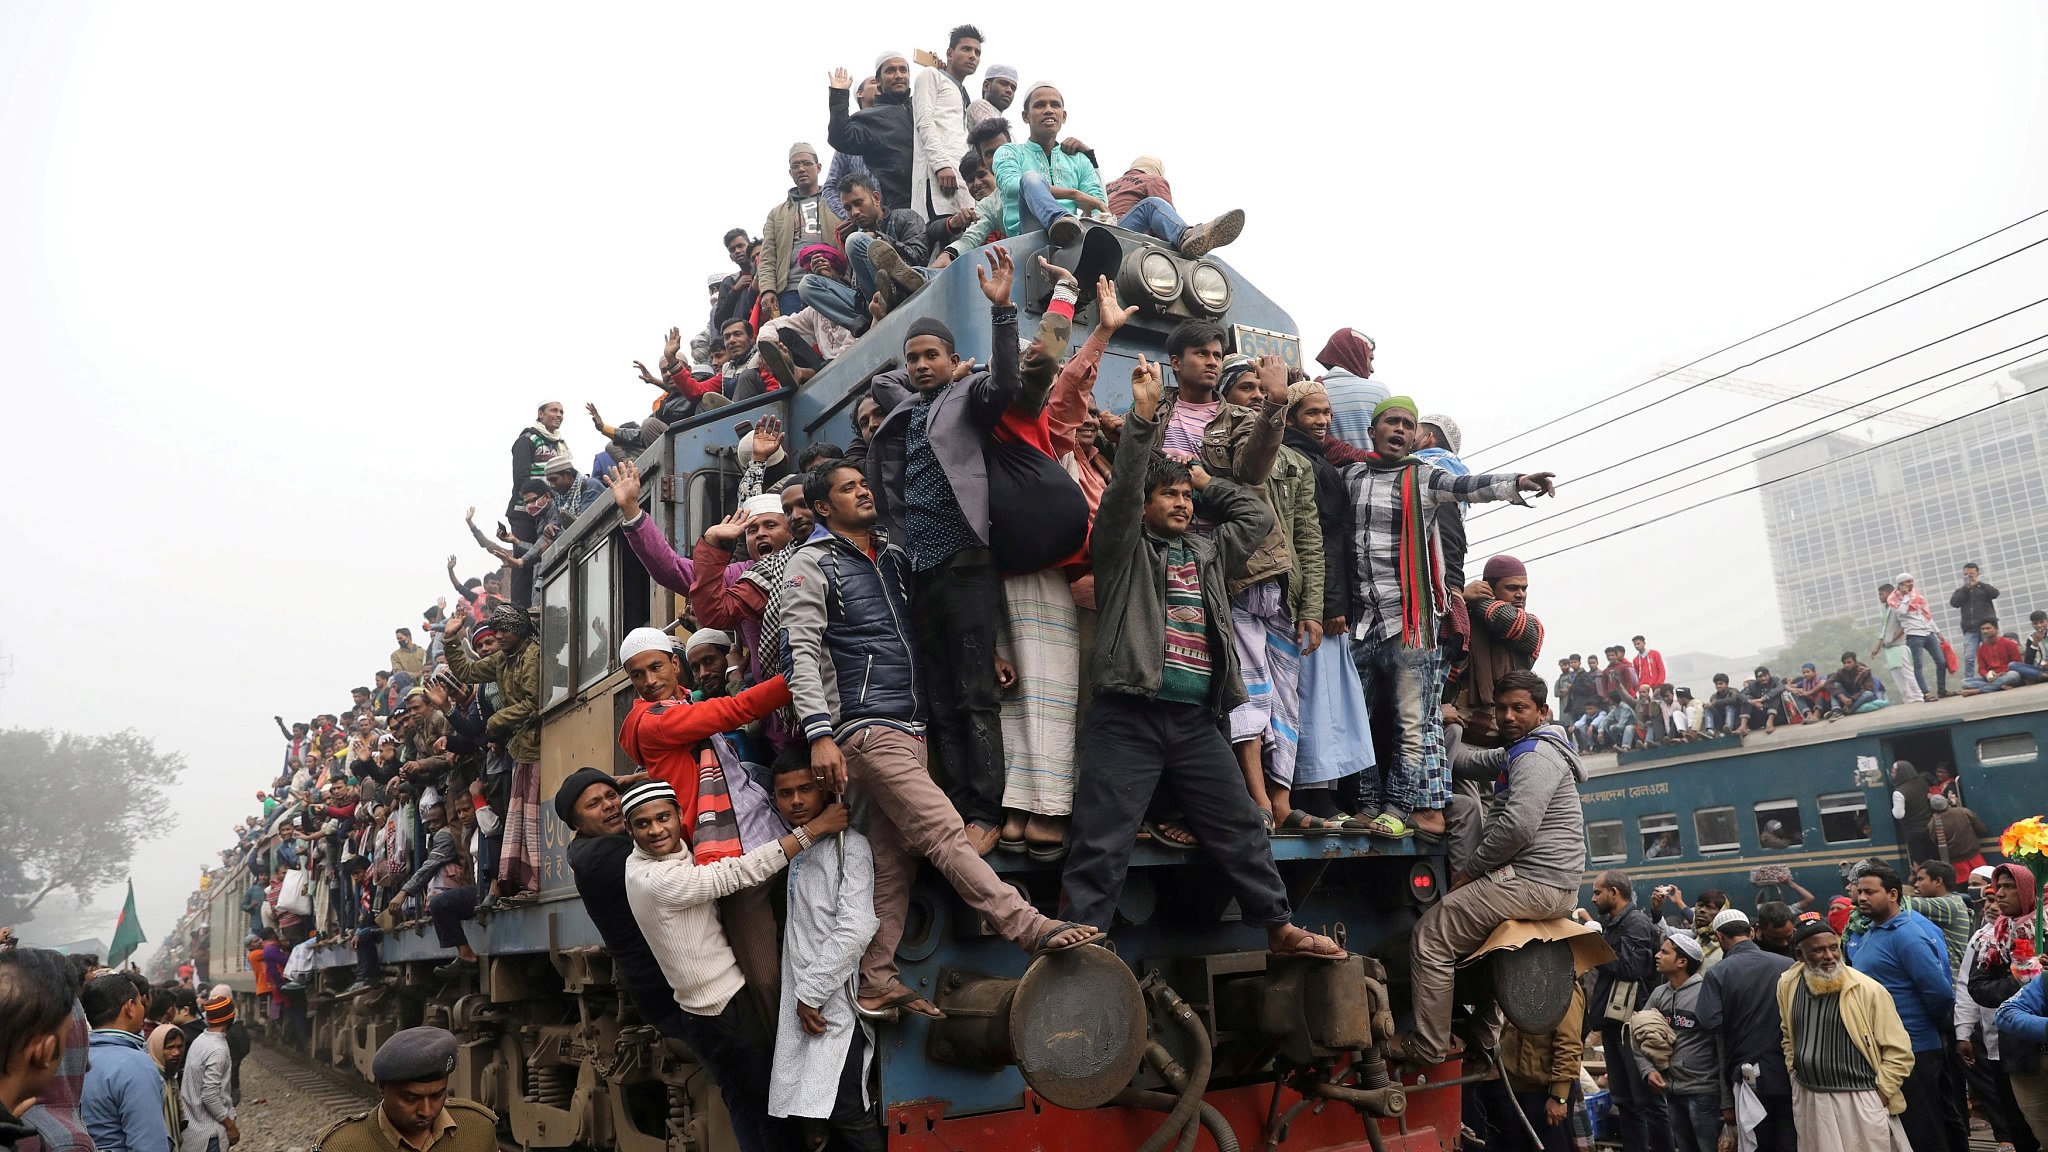 Insanely overcrowded trains in Bangladesh